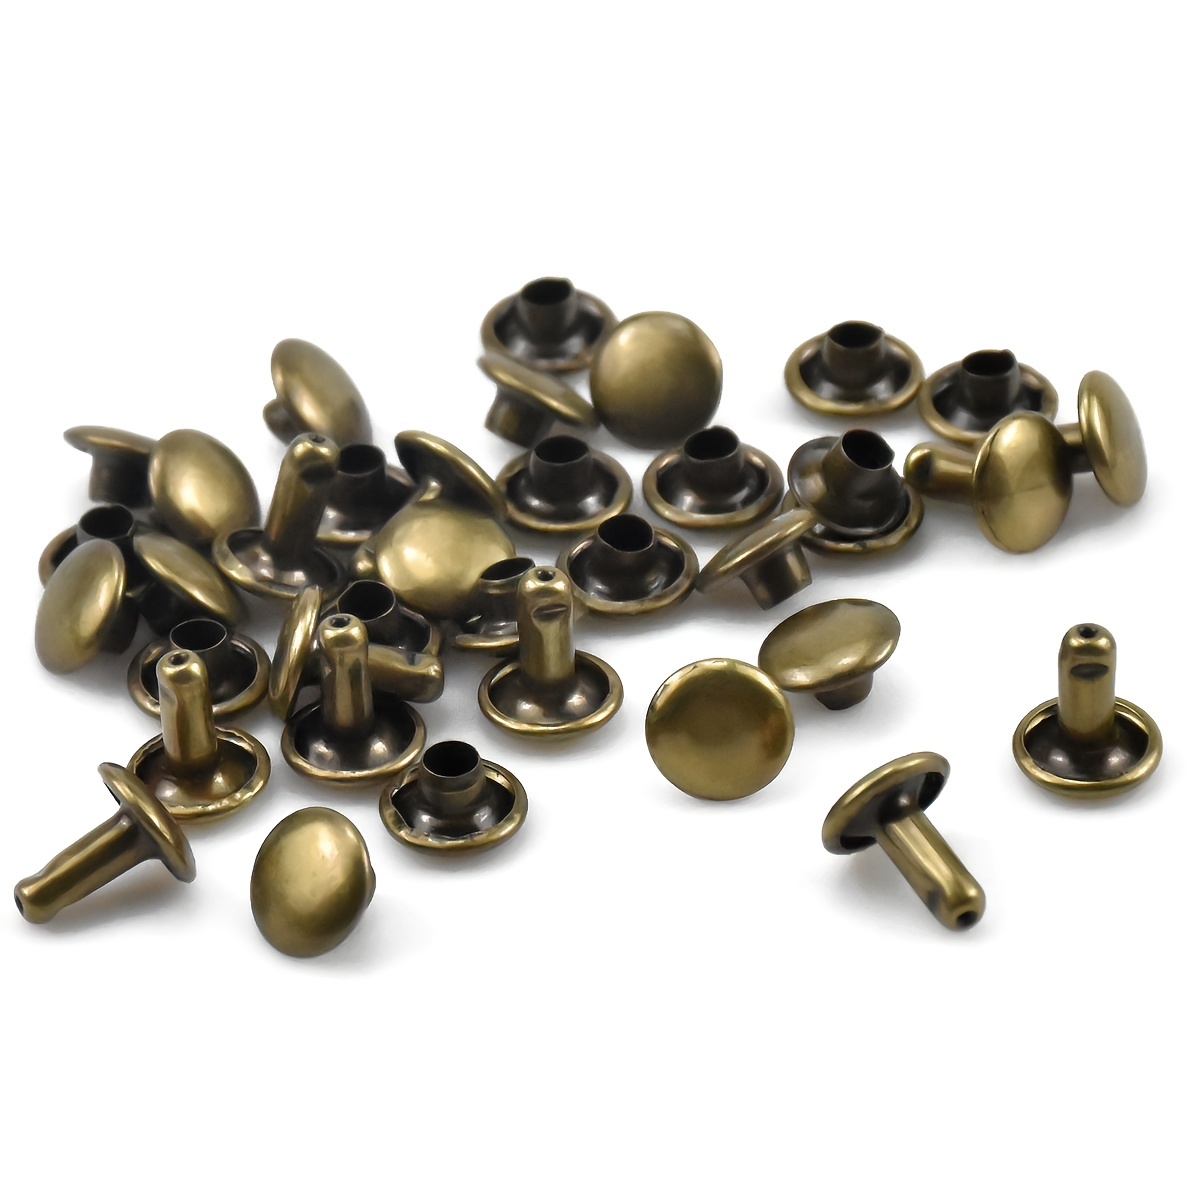 100Pcs/Set 6mm-12mm Metal Round Double Cap Rivets Studs Nail For Leather  Craft Accessories Repair Shoes Bag Belt Clothing